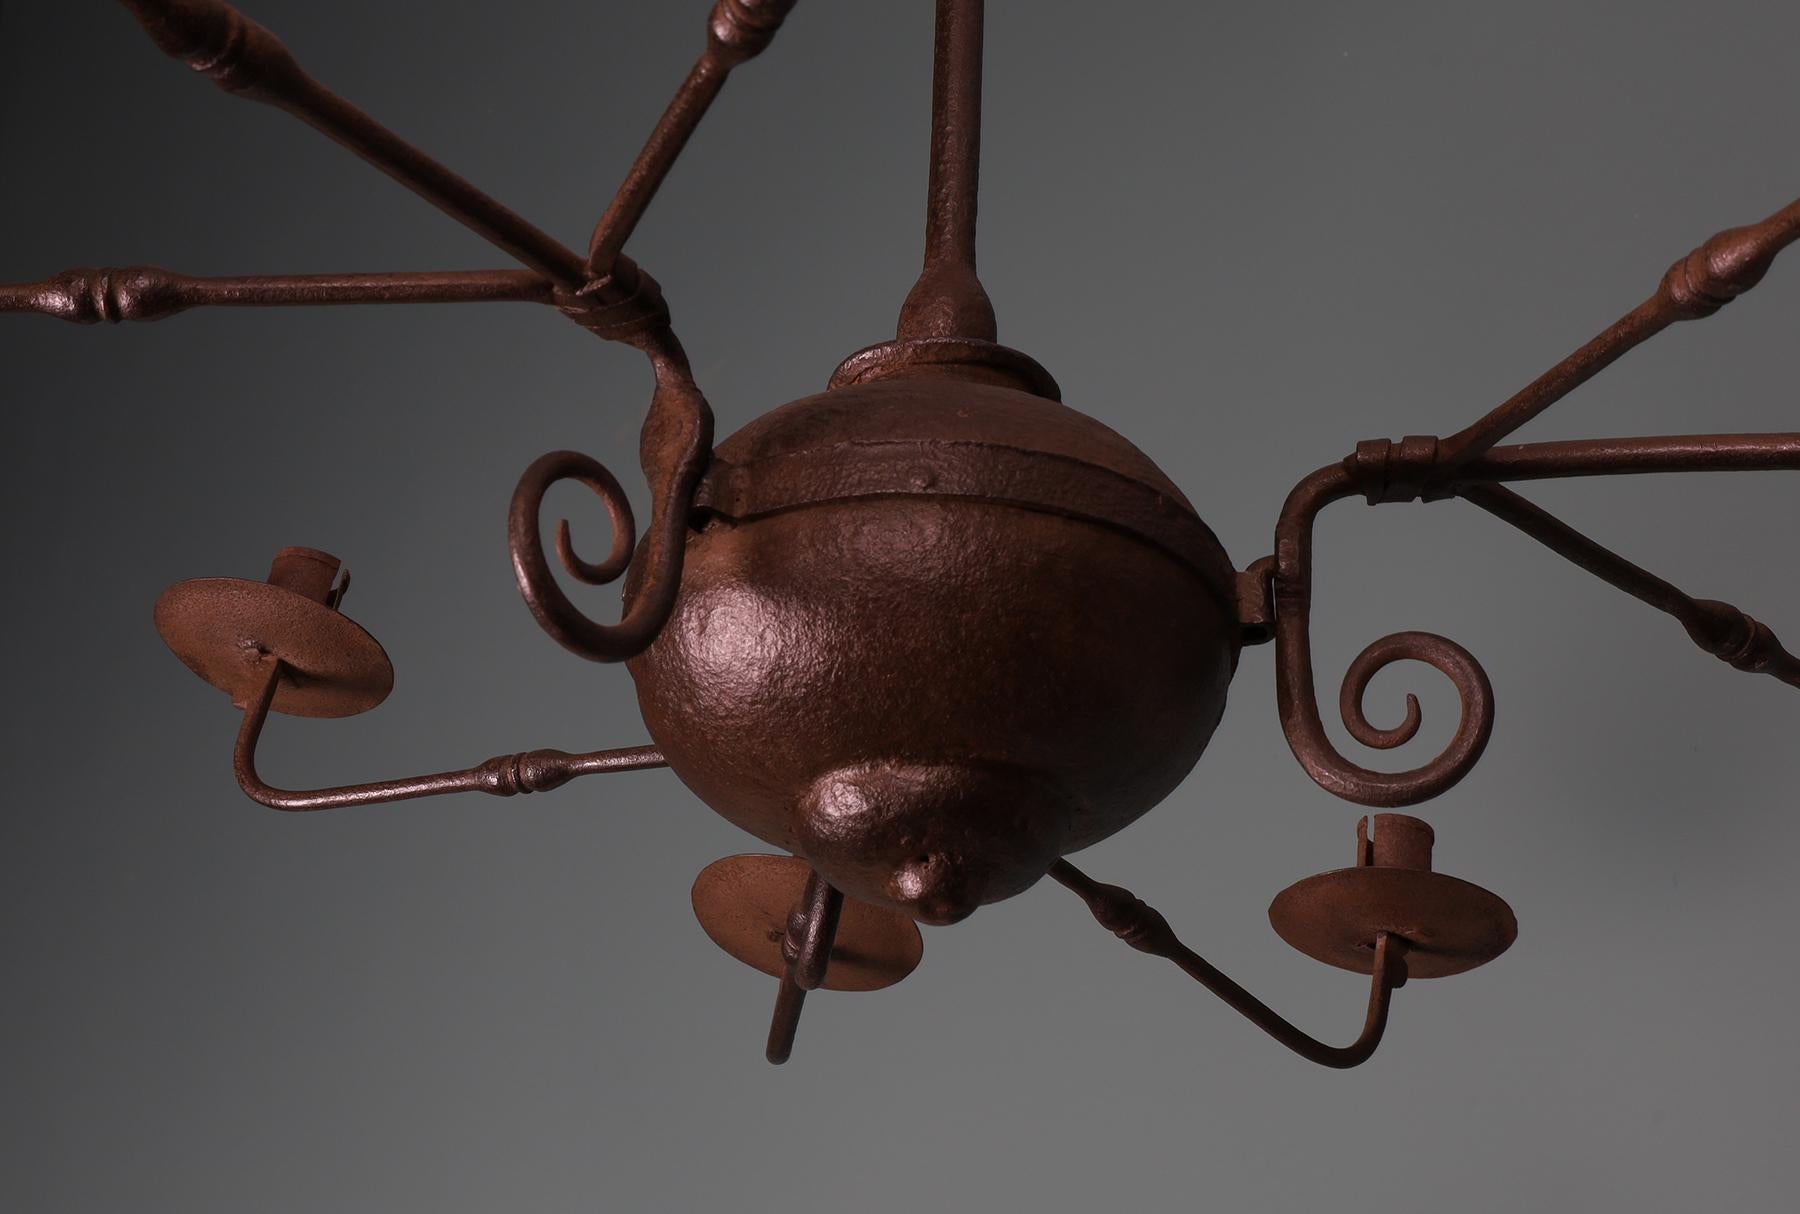 A 19th Century Wrought-Iron Chandelier. The central collared wrought bulb supports three triple-branched candle-holders. Waxed finish.
Wear consistent with age and use.